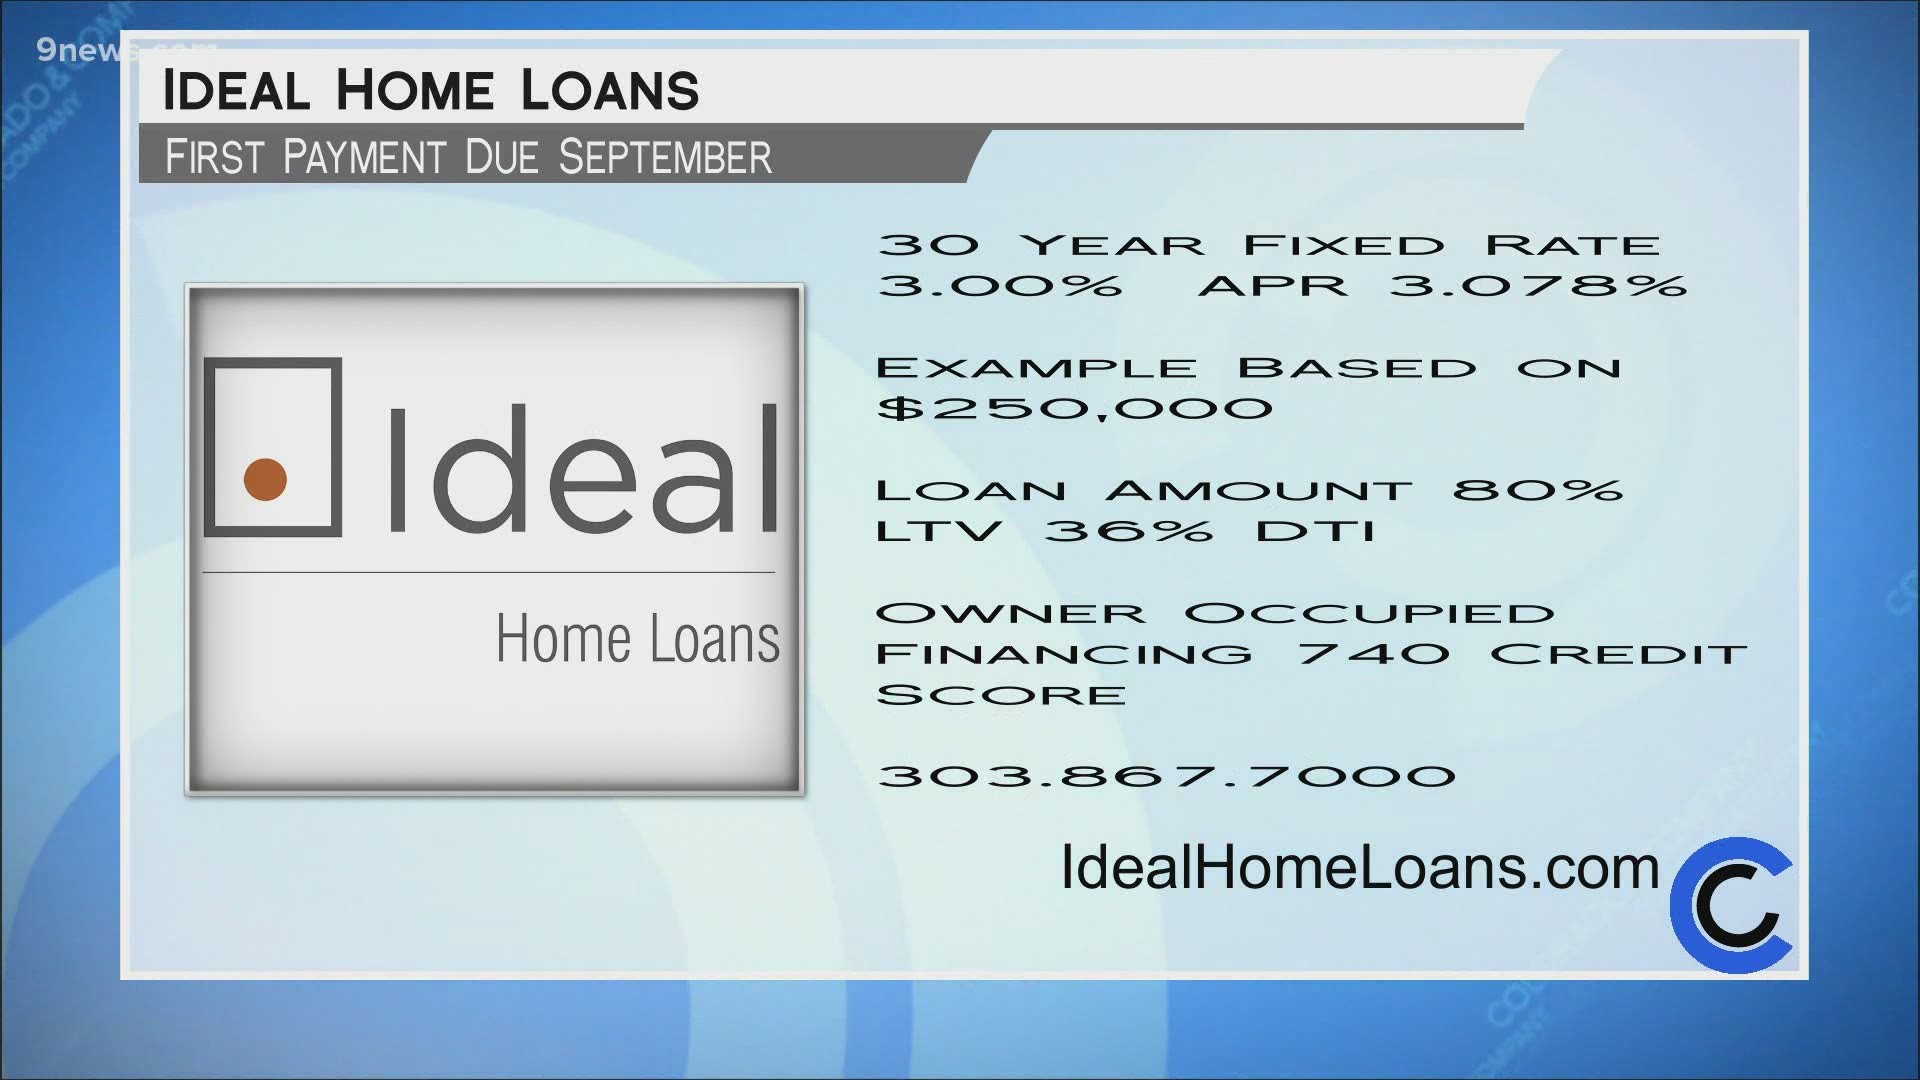 Complete the entire loan process from your own home. Call 303.867.7000, or visit IdealHomeLoans.com to refinance today and your payment won't be due until September!